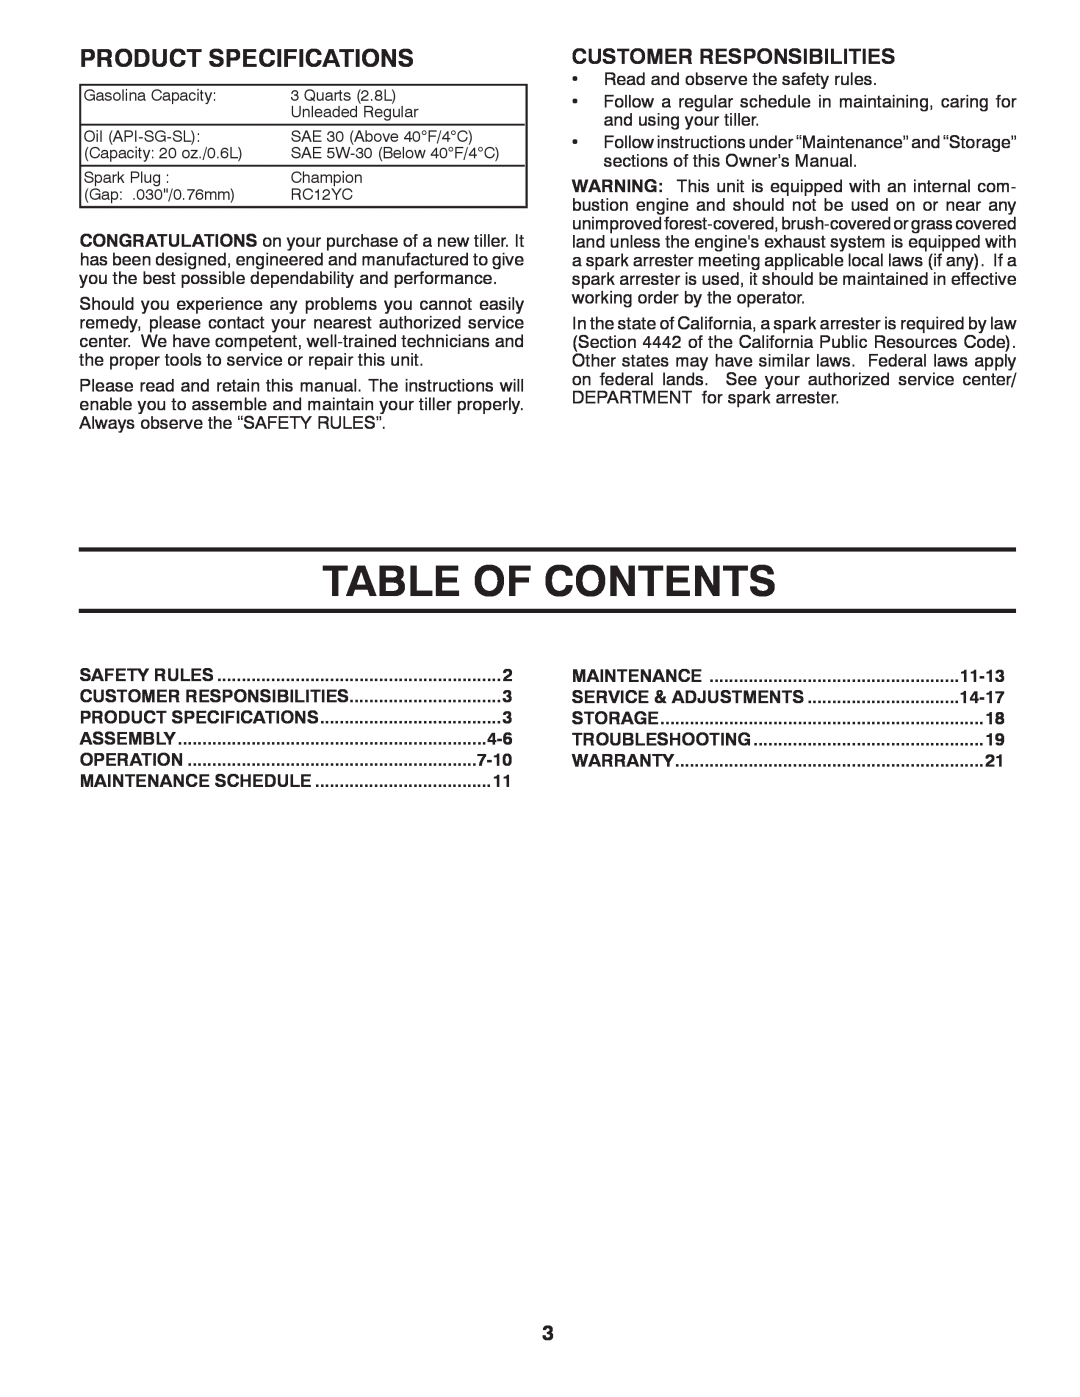 Poulan PRRT875X manual Table Of Contents, Product Specifications, Customer Responsibilities 